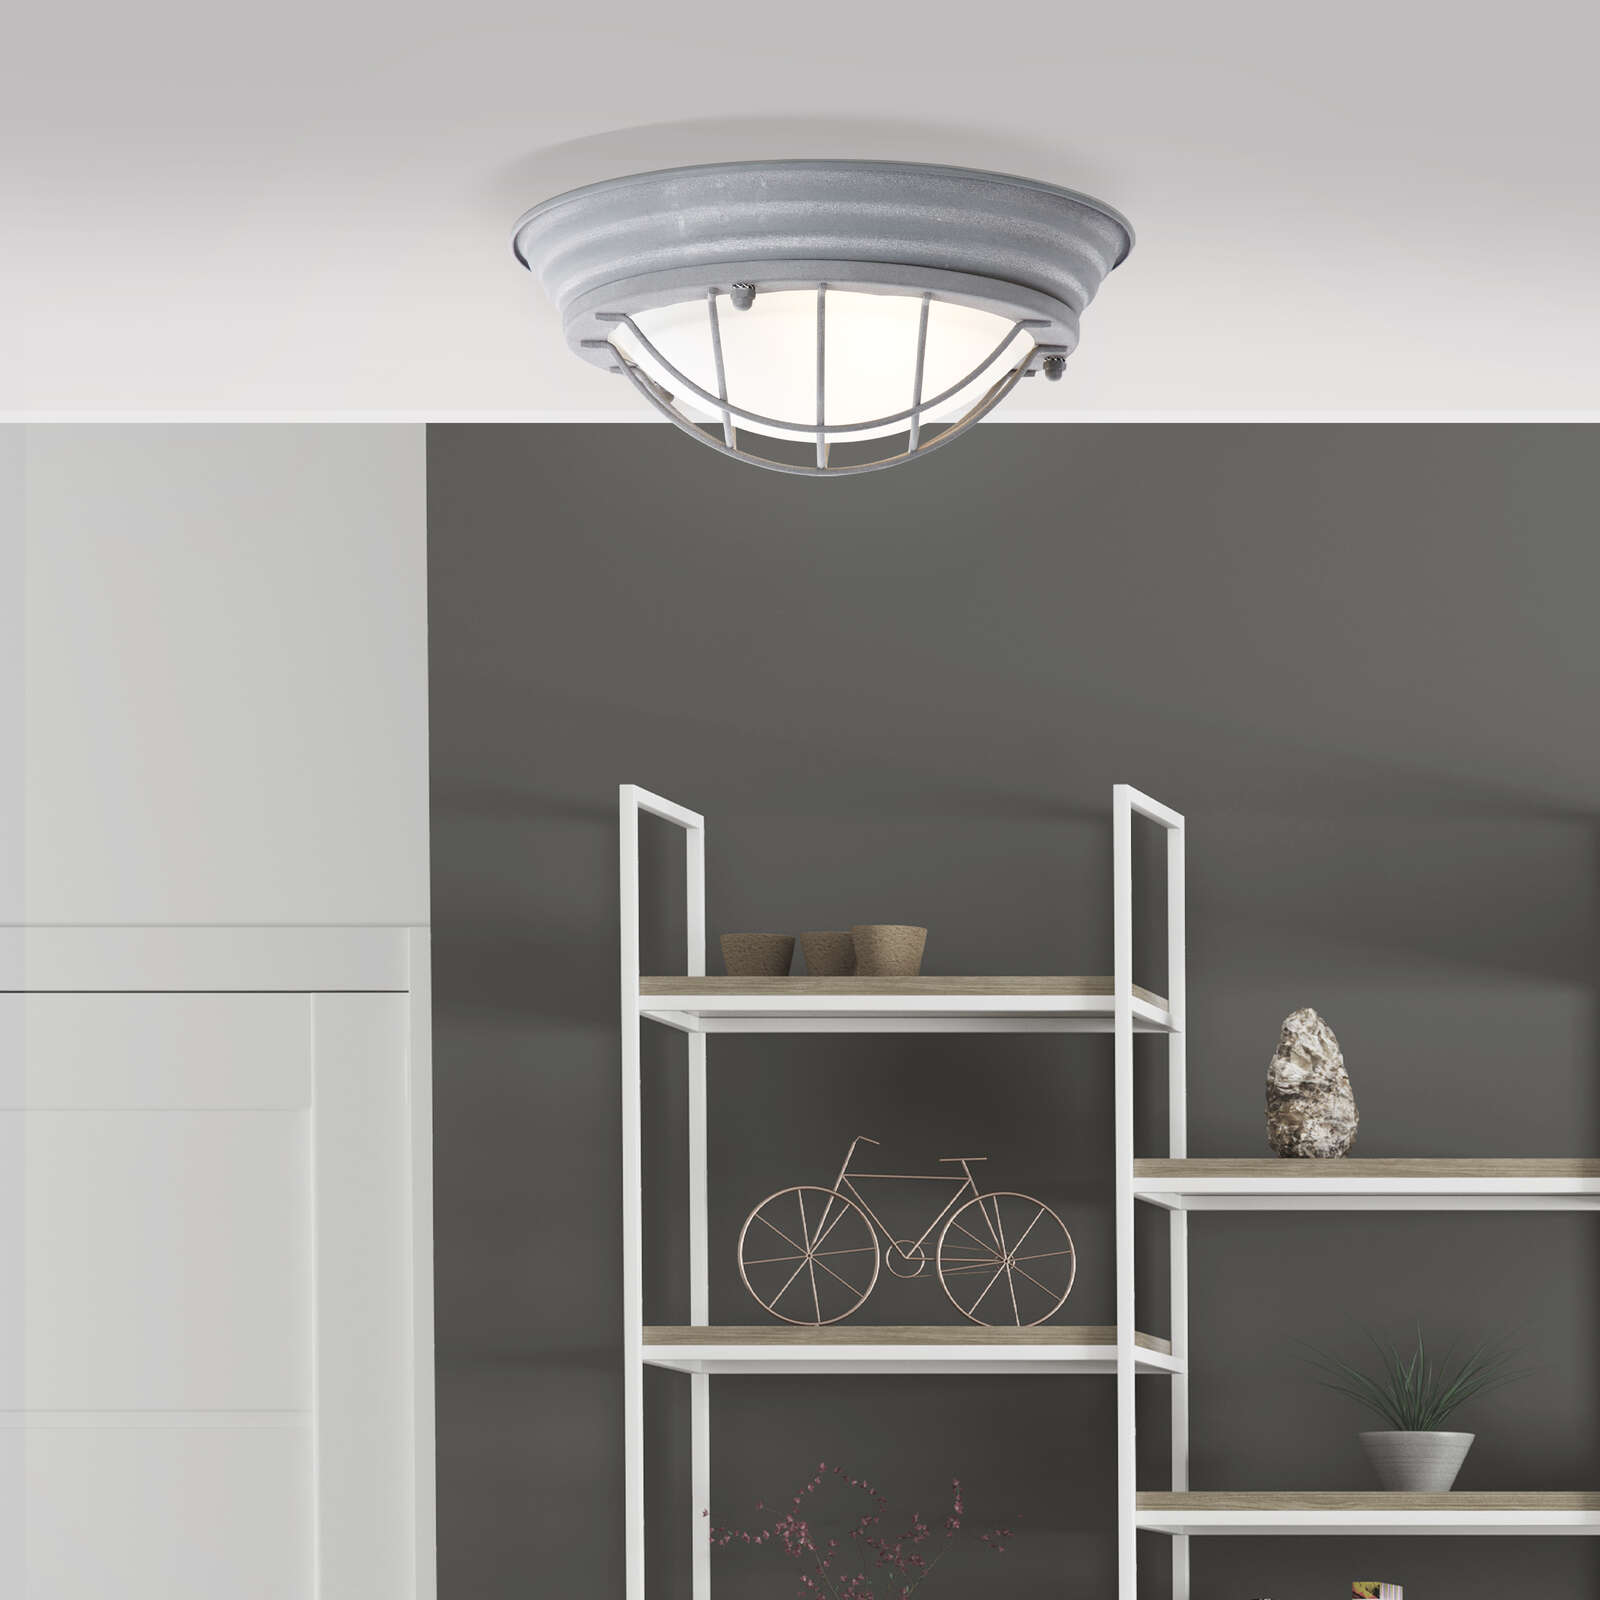             Metal wall and ceiling light - Sina 6 - Grey
        